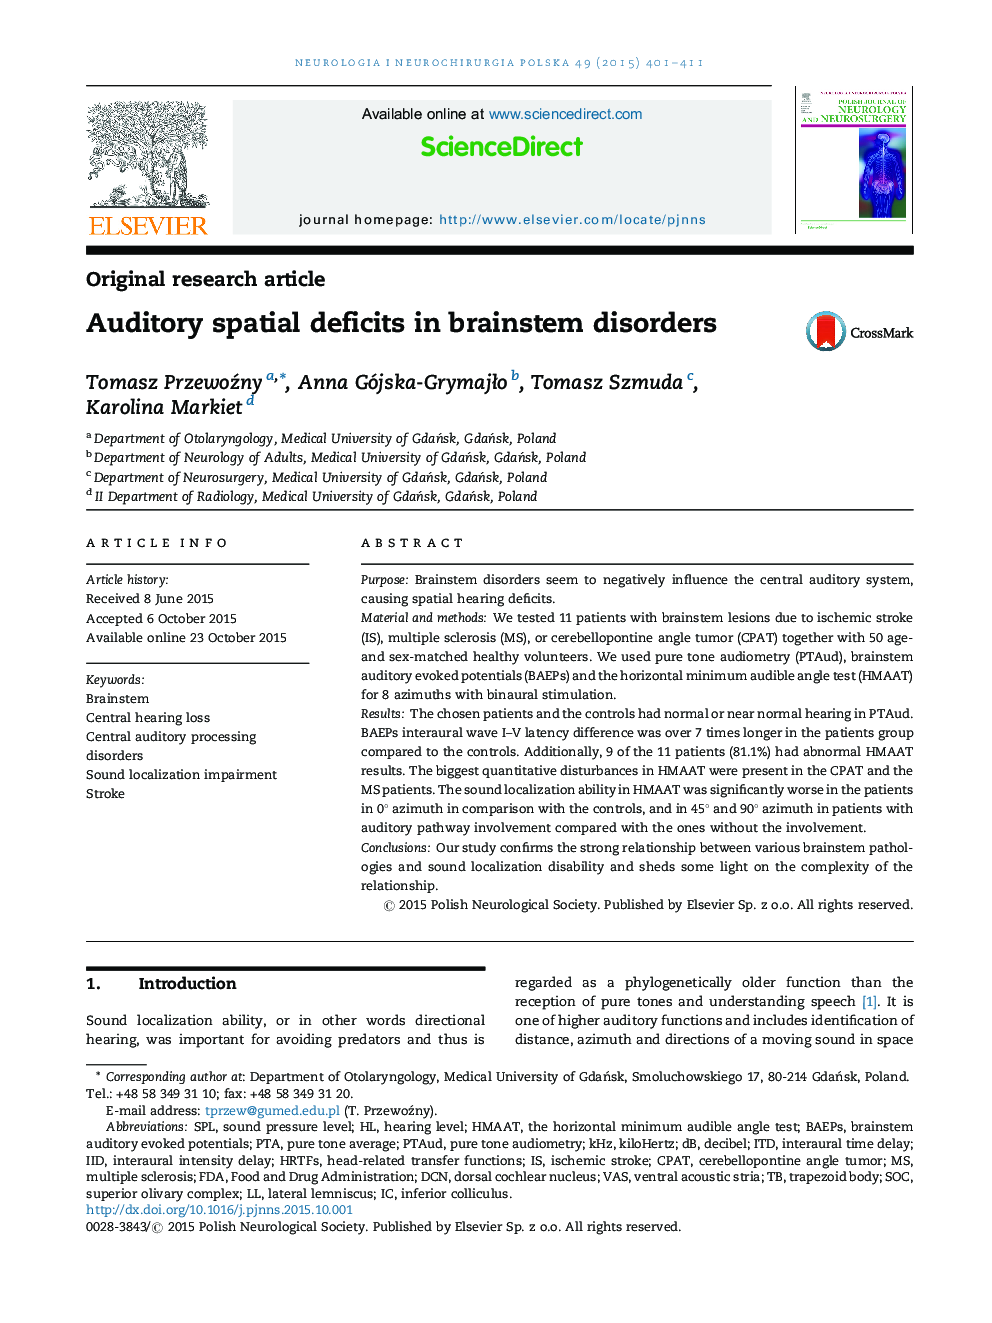 Auditory spatial deficits in brainstem disorders